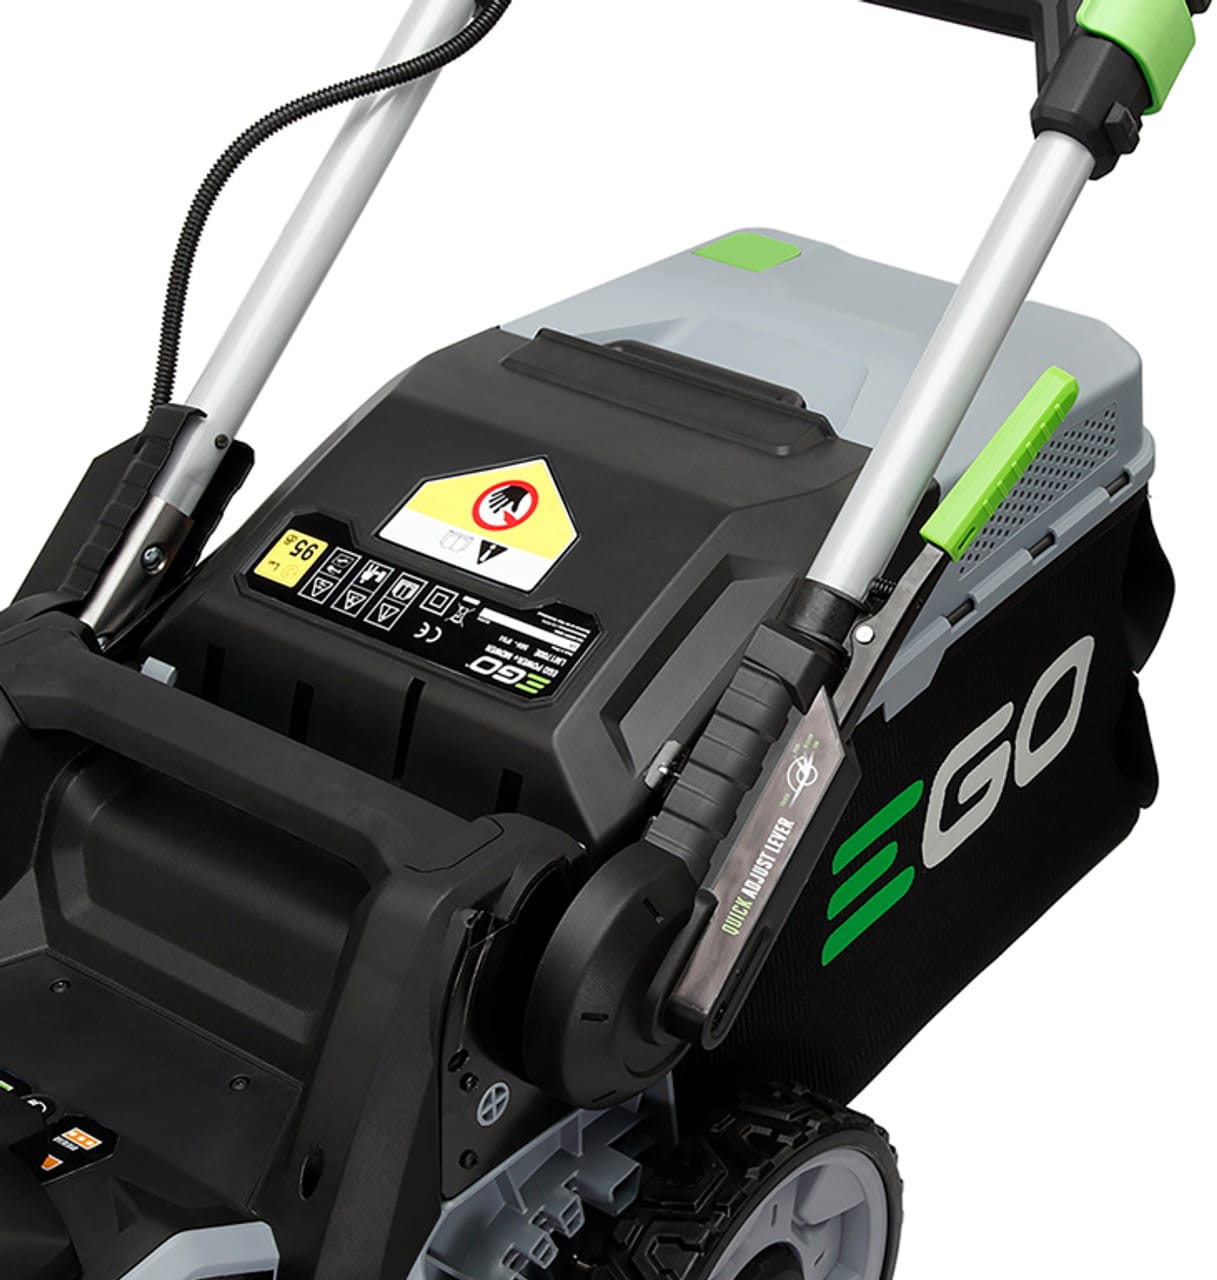 EGO Power+ LM1701E 42cm 56V Cordless Lawn Mower with Battery & Charger 6685